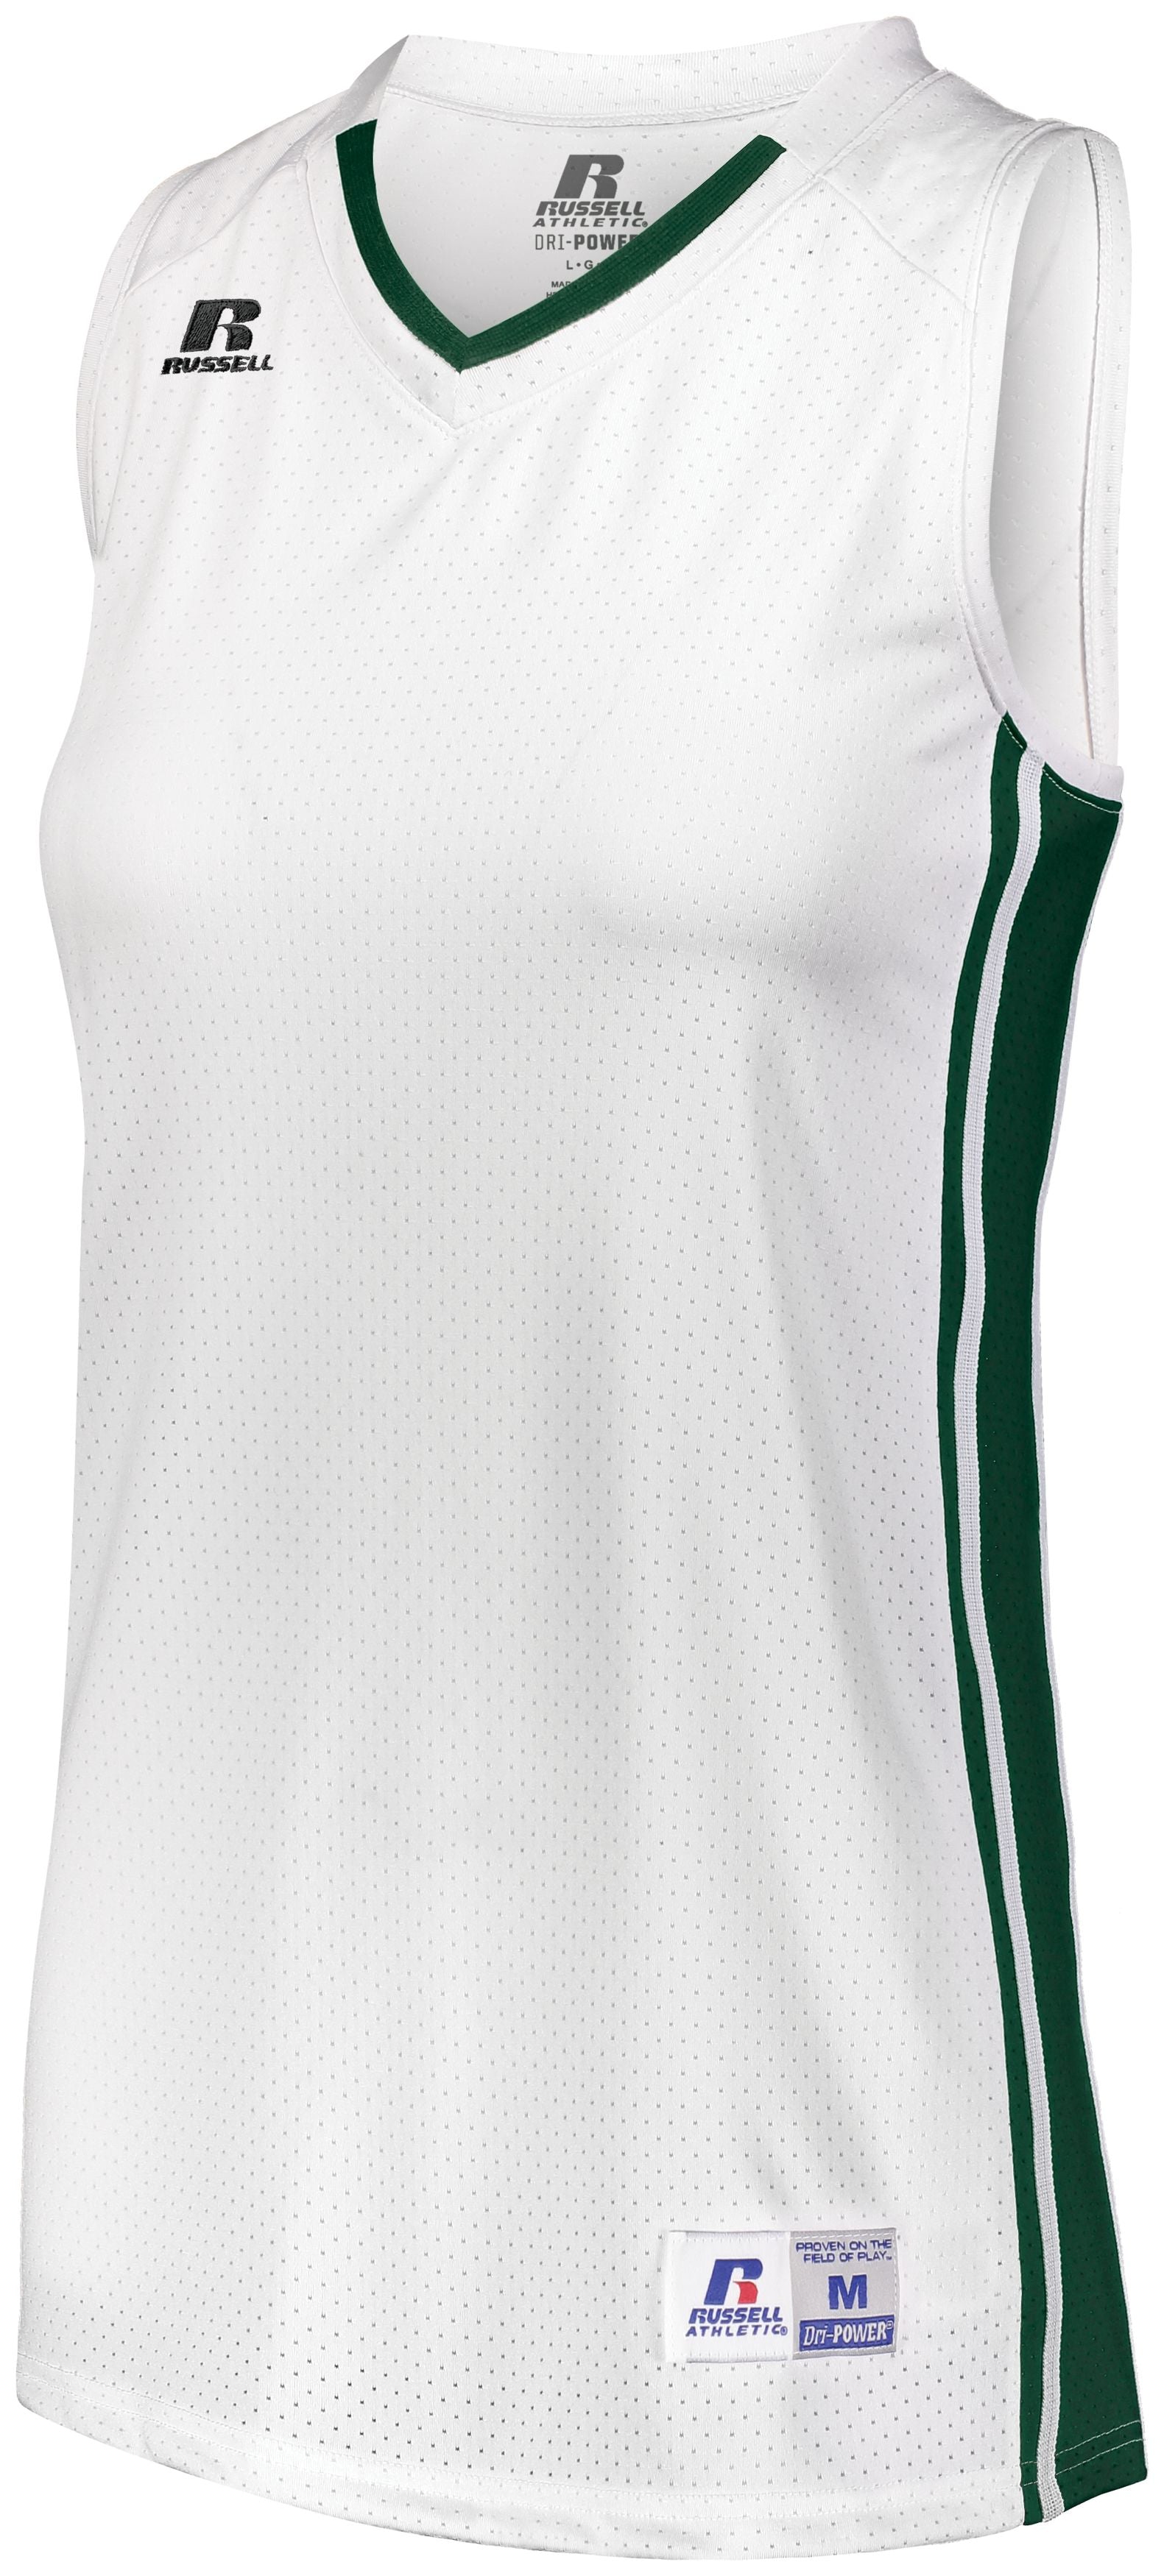 Russell Athletic Ladies Legacy Basketball Jersey in White/Dark Green  -Part of the Ladies, Ladies-Jersey, Basketball, Russell-Athletic-Products, Shirts, All-Sports, All-Sports-1 product lines at KanaleyCreations.com